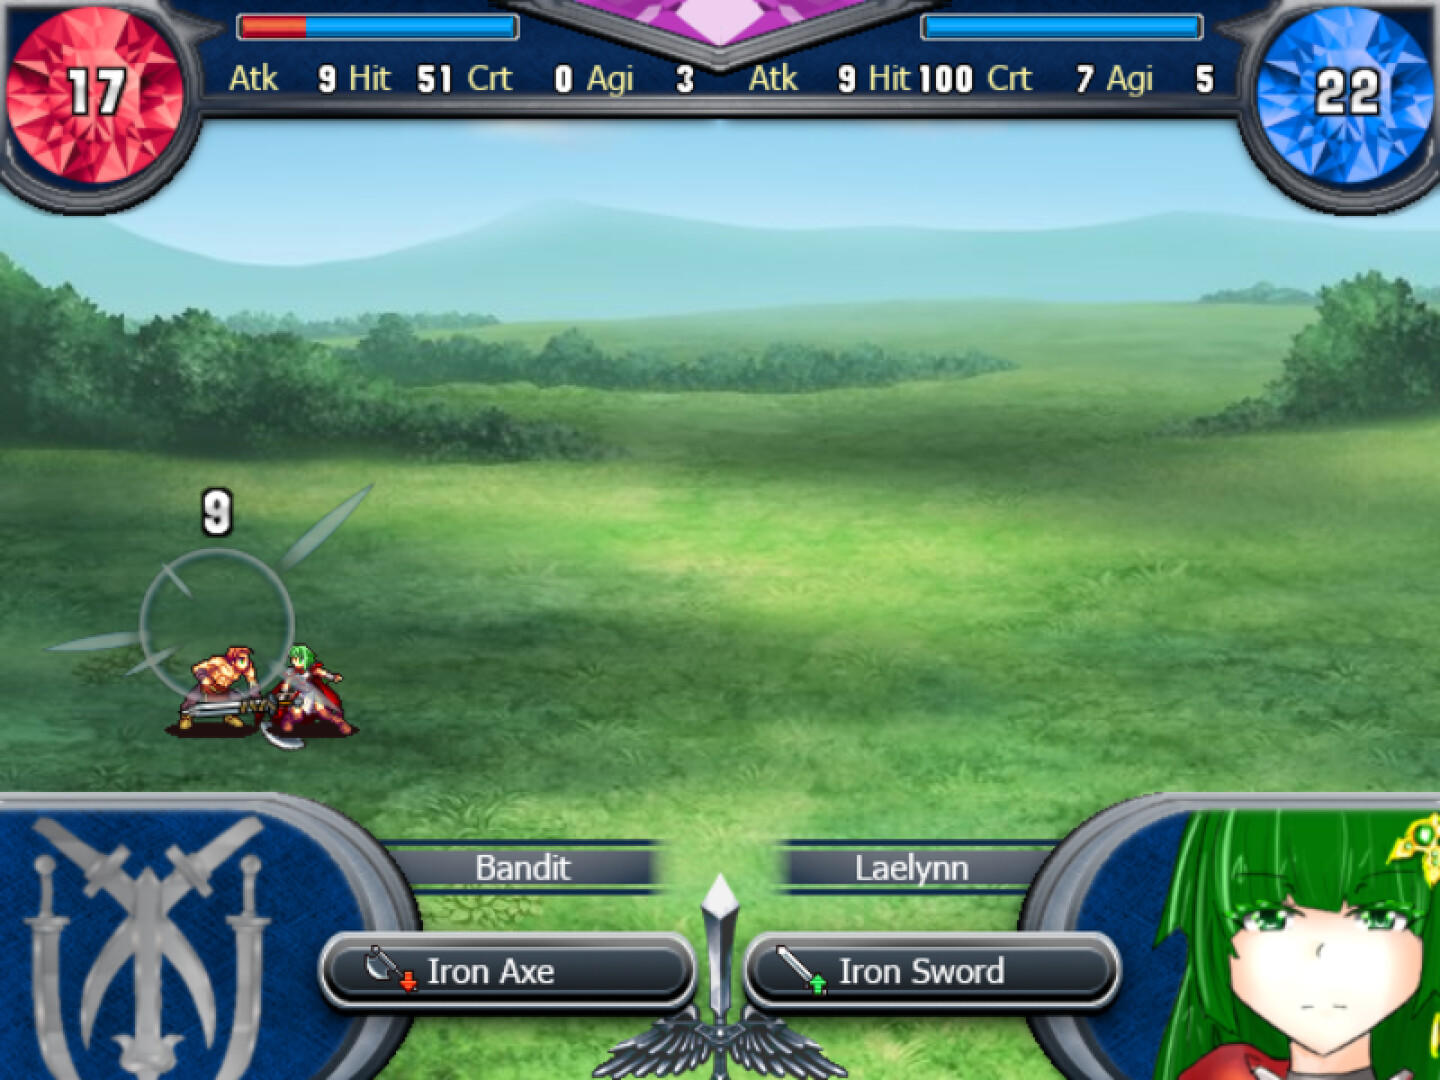 R0: Concourse of Conquest screenshot game